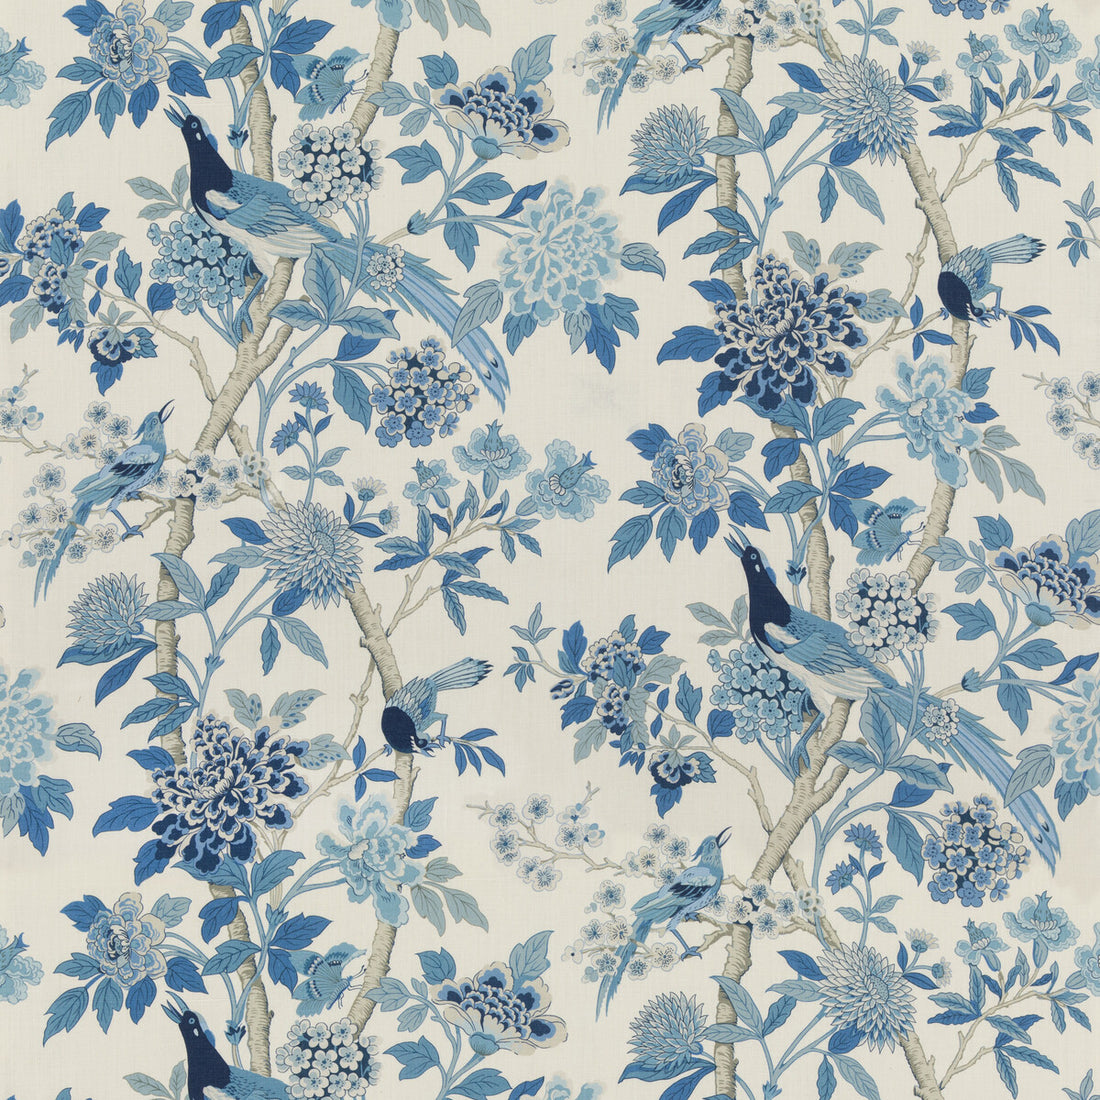 Hydrangea Bird - Archive fabric in blue color - pattern BP10851.1.0 - by G P &amp; J Baker in the Chifu collection